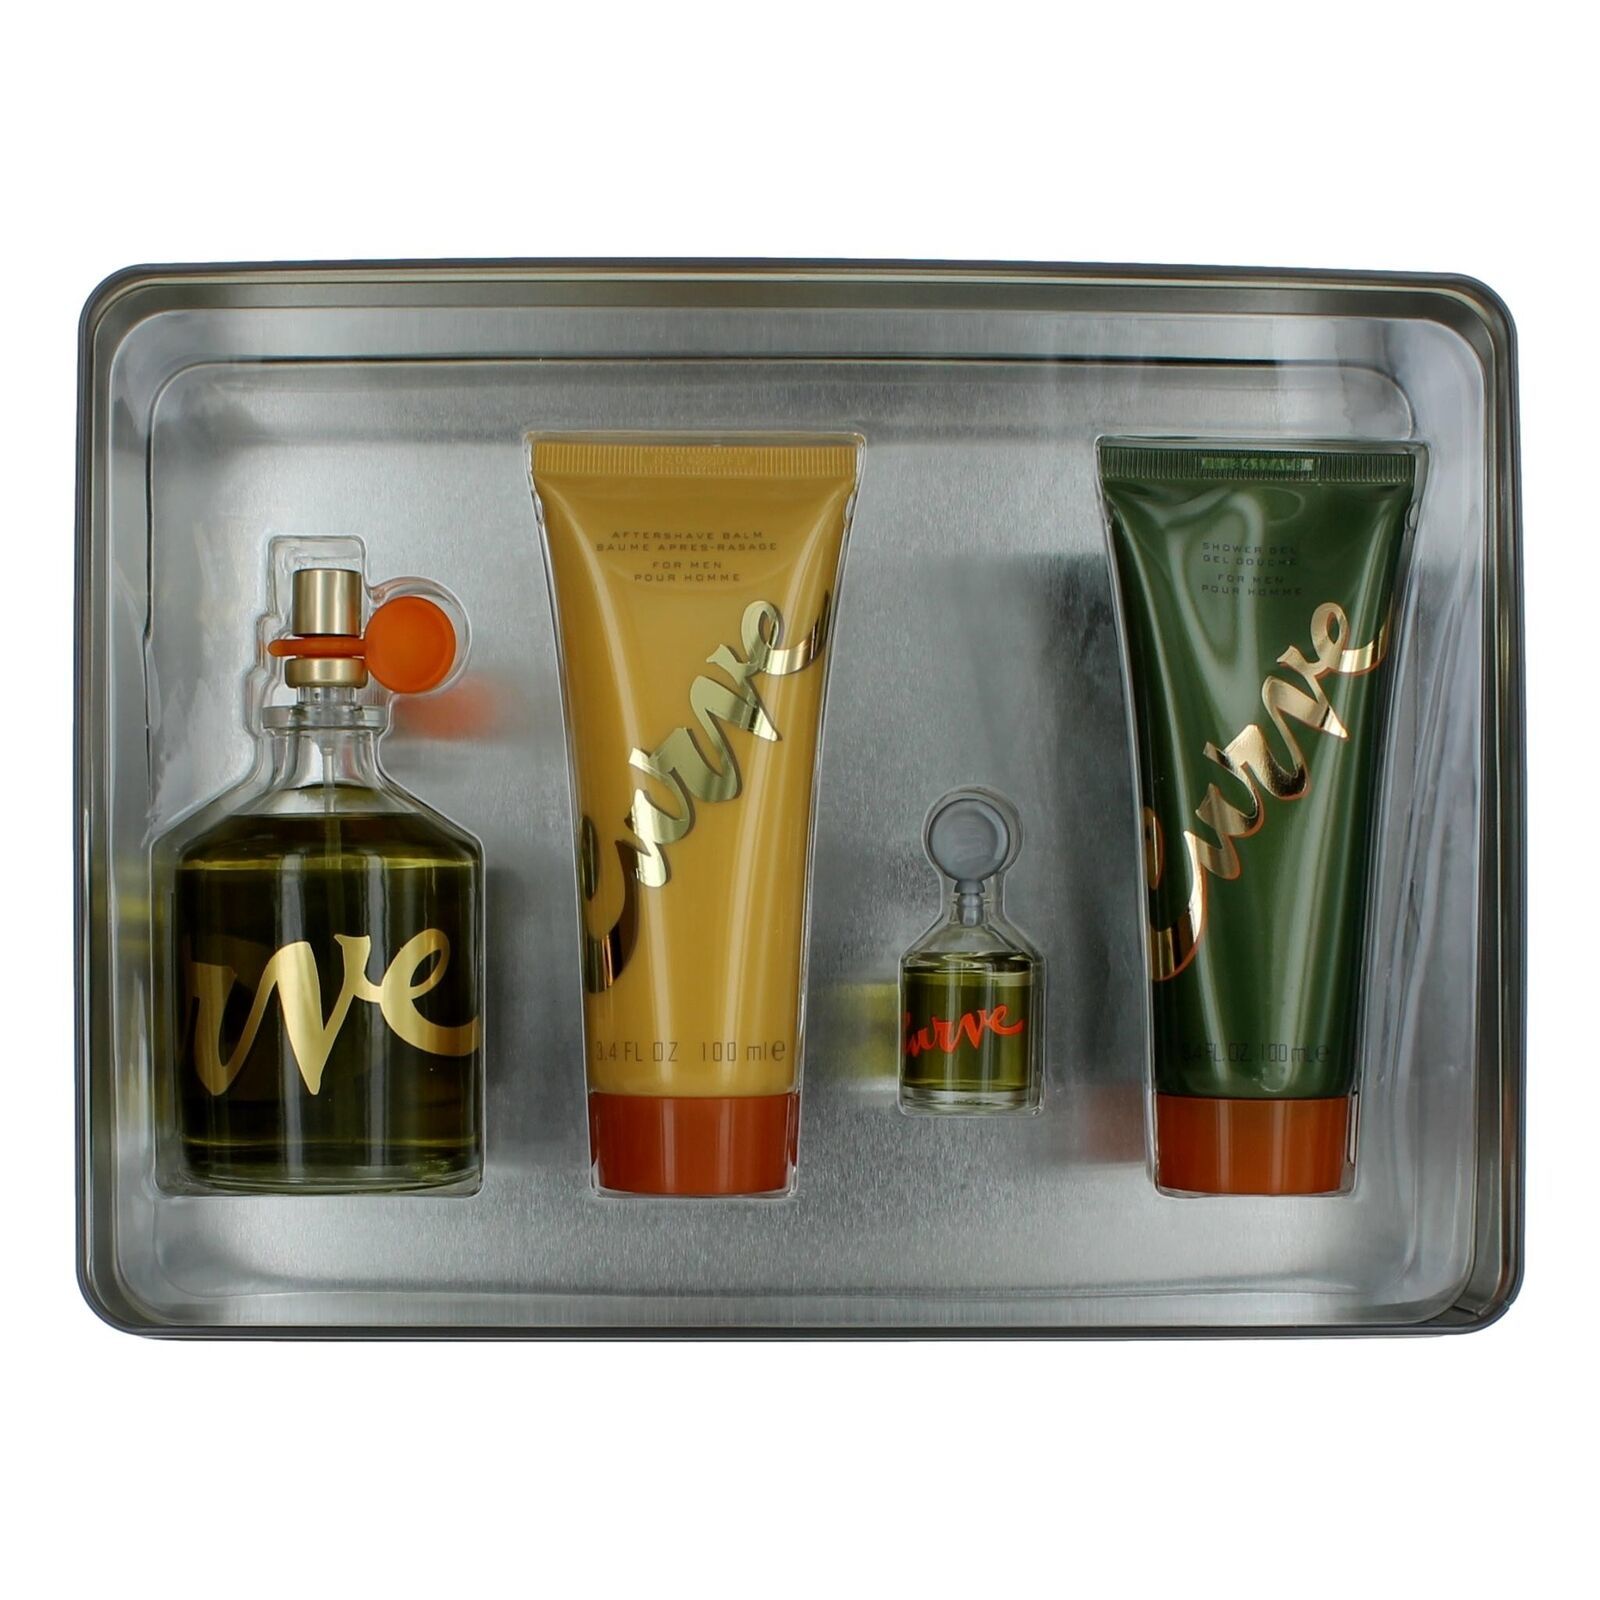 Curve by Liz Claiborne, 4 Piece Gift Set for Men with 4.2 oz In A Tin Box - $45.51